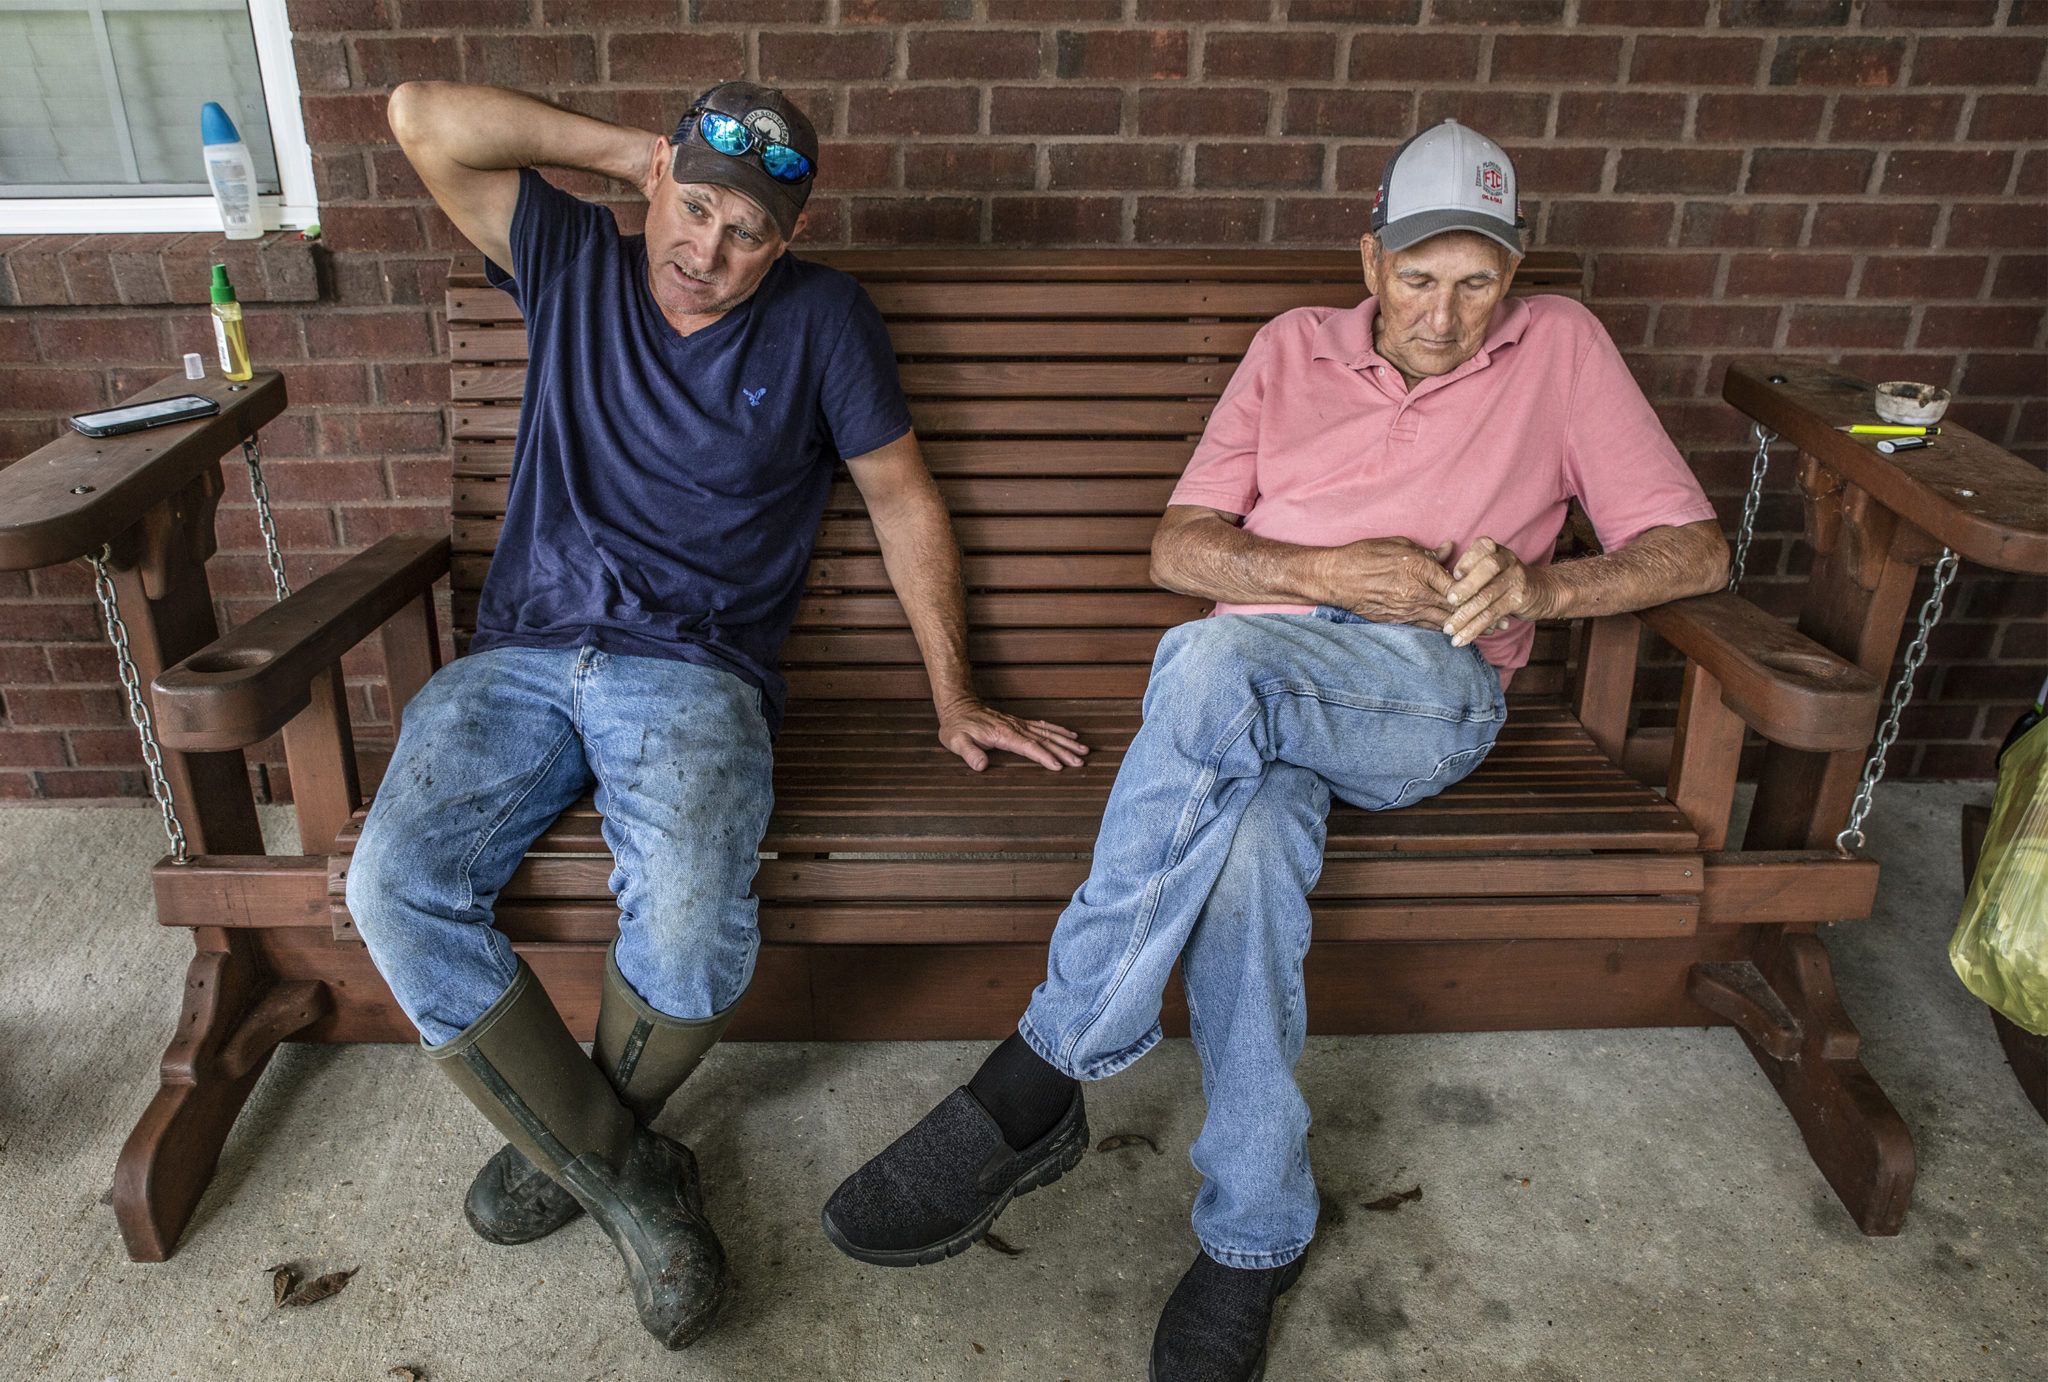 Fishermen Chad Stork, left, and Wayne Tillman at Stork’s home in Lucedale. Chad Stork is a fifth-generation fisherman. “I reckon it’s in my blood,” he said. Image by Eric J. Shelton for Mississippi Today. United States, 2019.